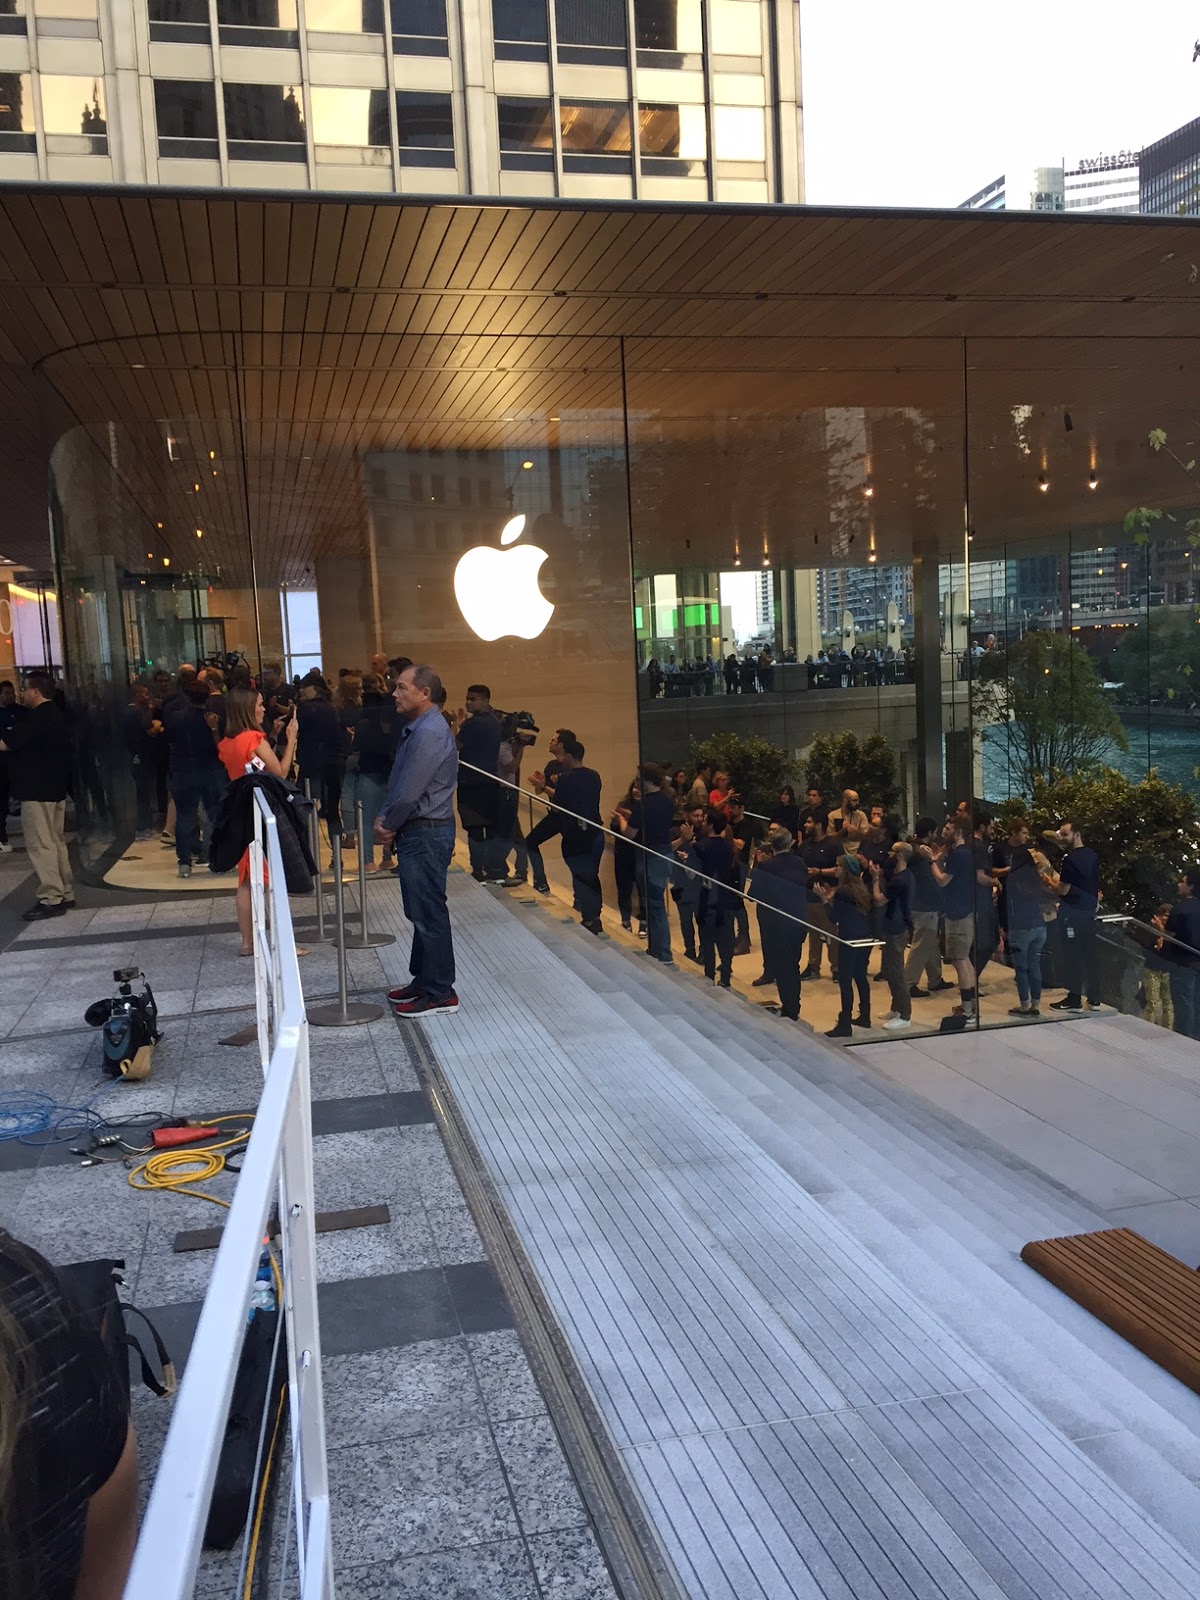 Apple offers a look inside new Michigan Avenue store - Chicago Sun-Times